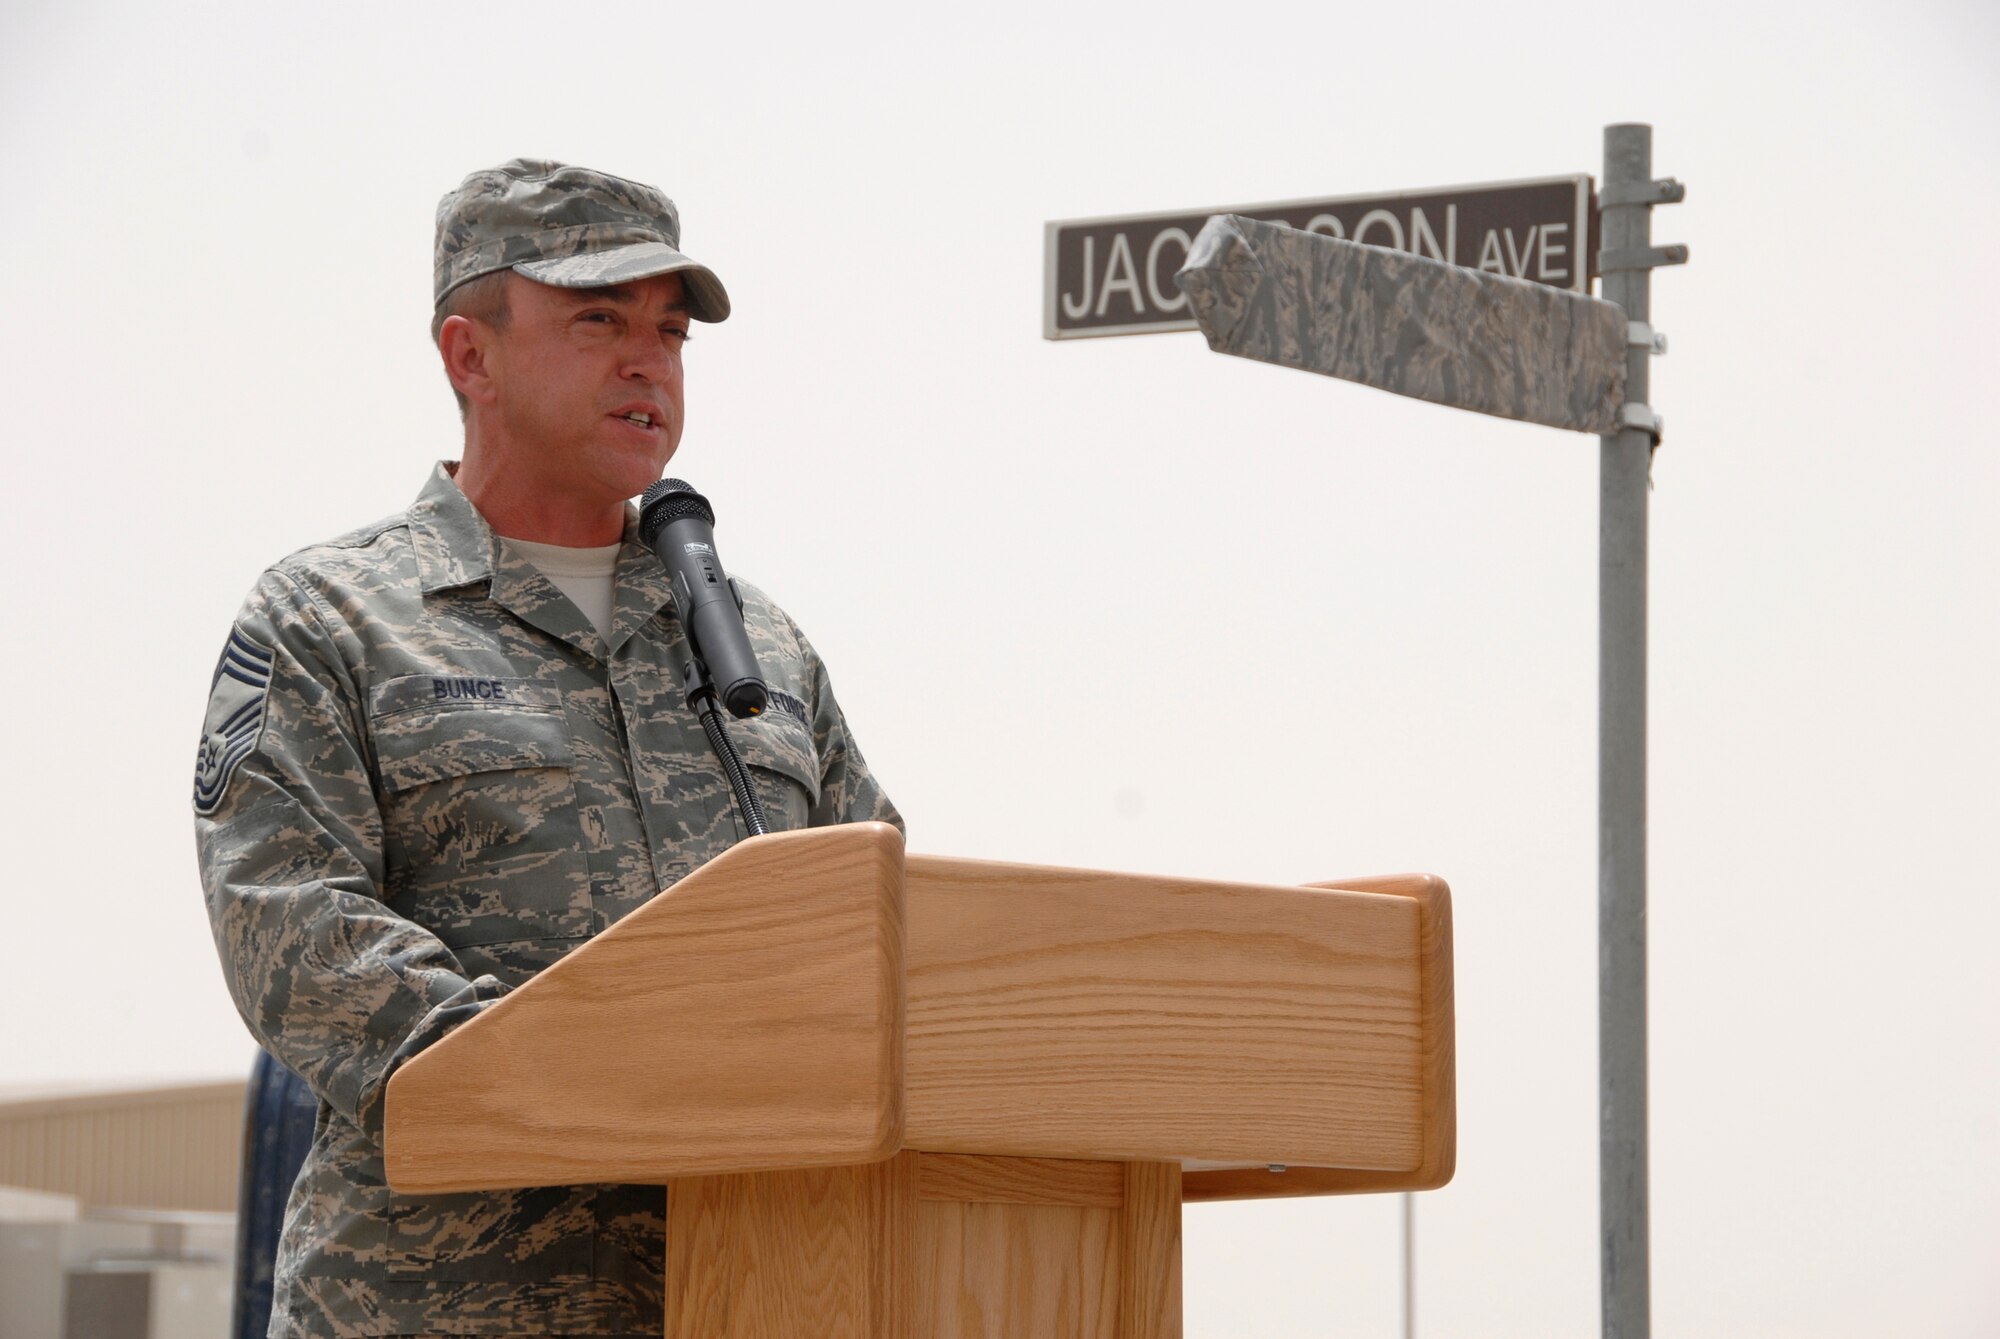 SOUTHWEST ASIA -- Chief Master Sgt. Richard Bunce, 100th Logistics Readiness Squadron chief enlisted manager, who Airman 1st Class Eric Barnes worked for at the time of his death, speaks during a street dedication ceremony June 10, 2008 on an air base in the Persian Gulf Region. The ceremony is a tribute to Airman Barnes and his family with the naming of Barnes Road. Airman Barnes, 20, of Lorain, Ohio, died June 10, 2007 as a result of an improved explosive device attack on an Air Force convoy about 100 miles south of Baghdad, Iraq. He was deployed from the 90th Logistics Readiness Squadron at F.E. Warren Air Force Base, Wyo.  (U.S. Air Force photo/ Staff Sgt. Patrick Dixon)